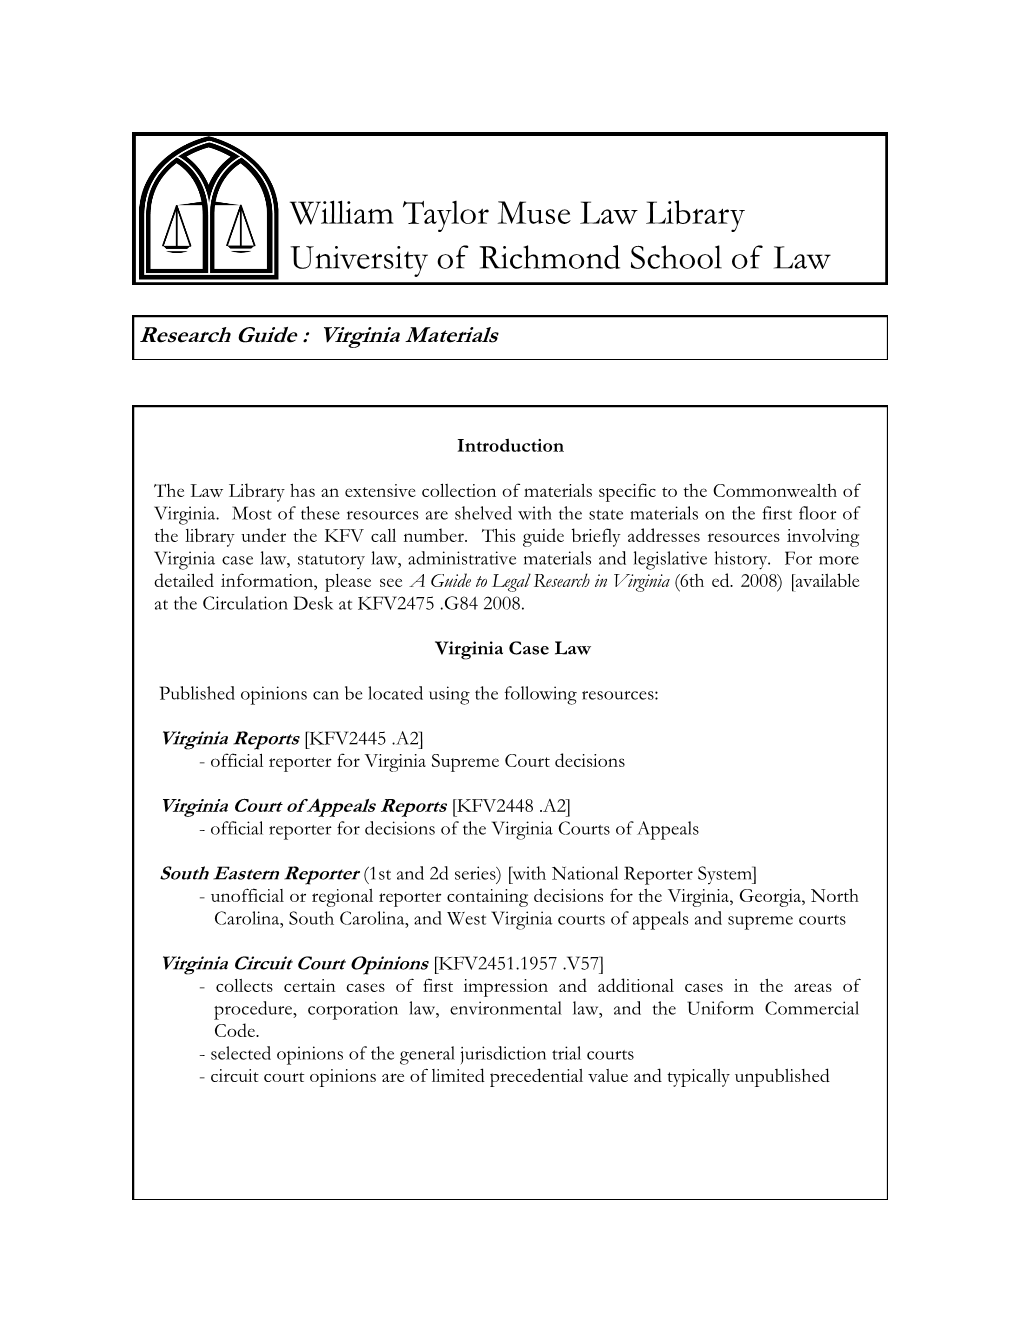 William Taylor Muse Law Library University of Richmond School of Law